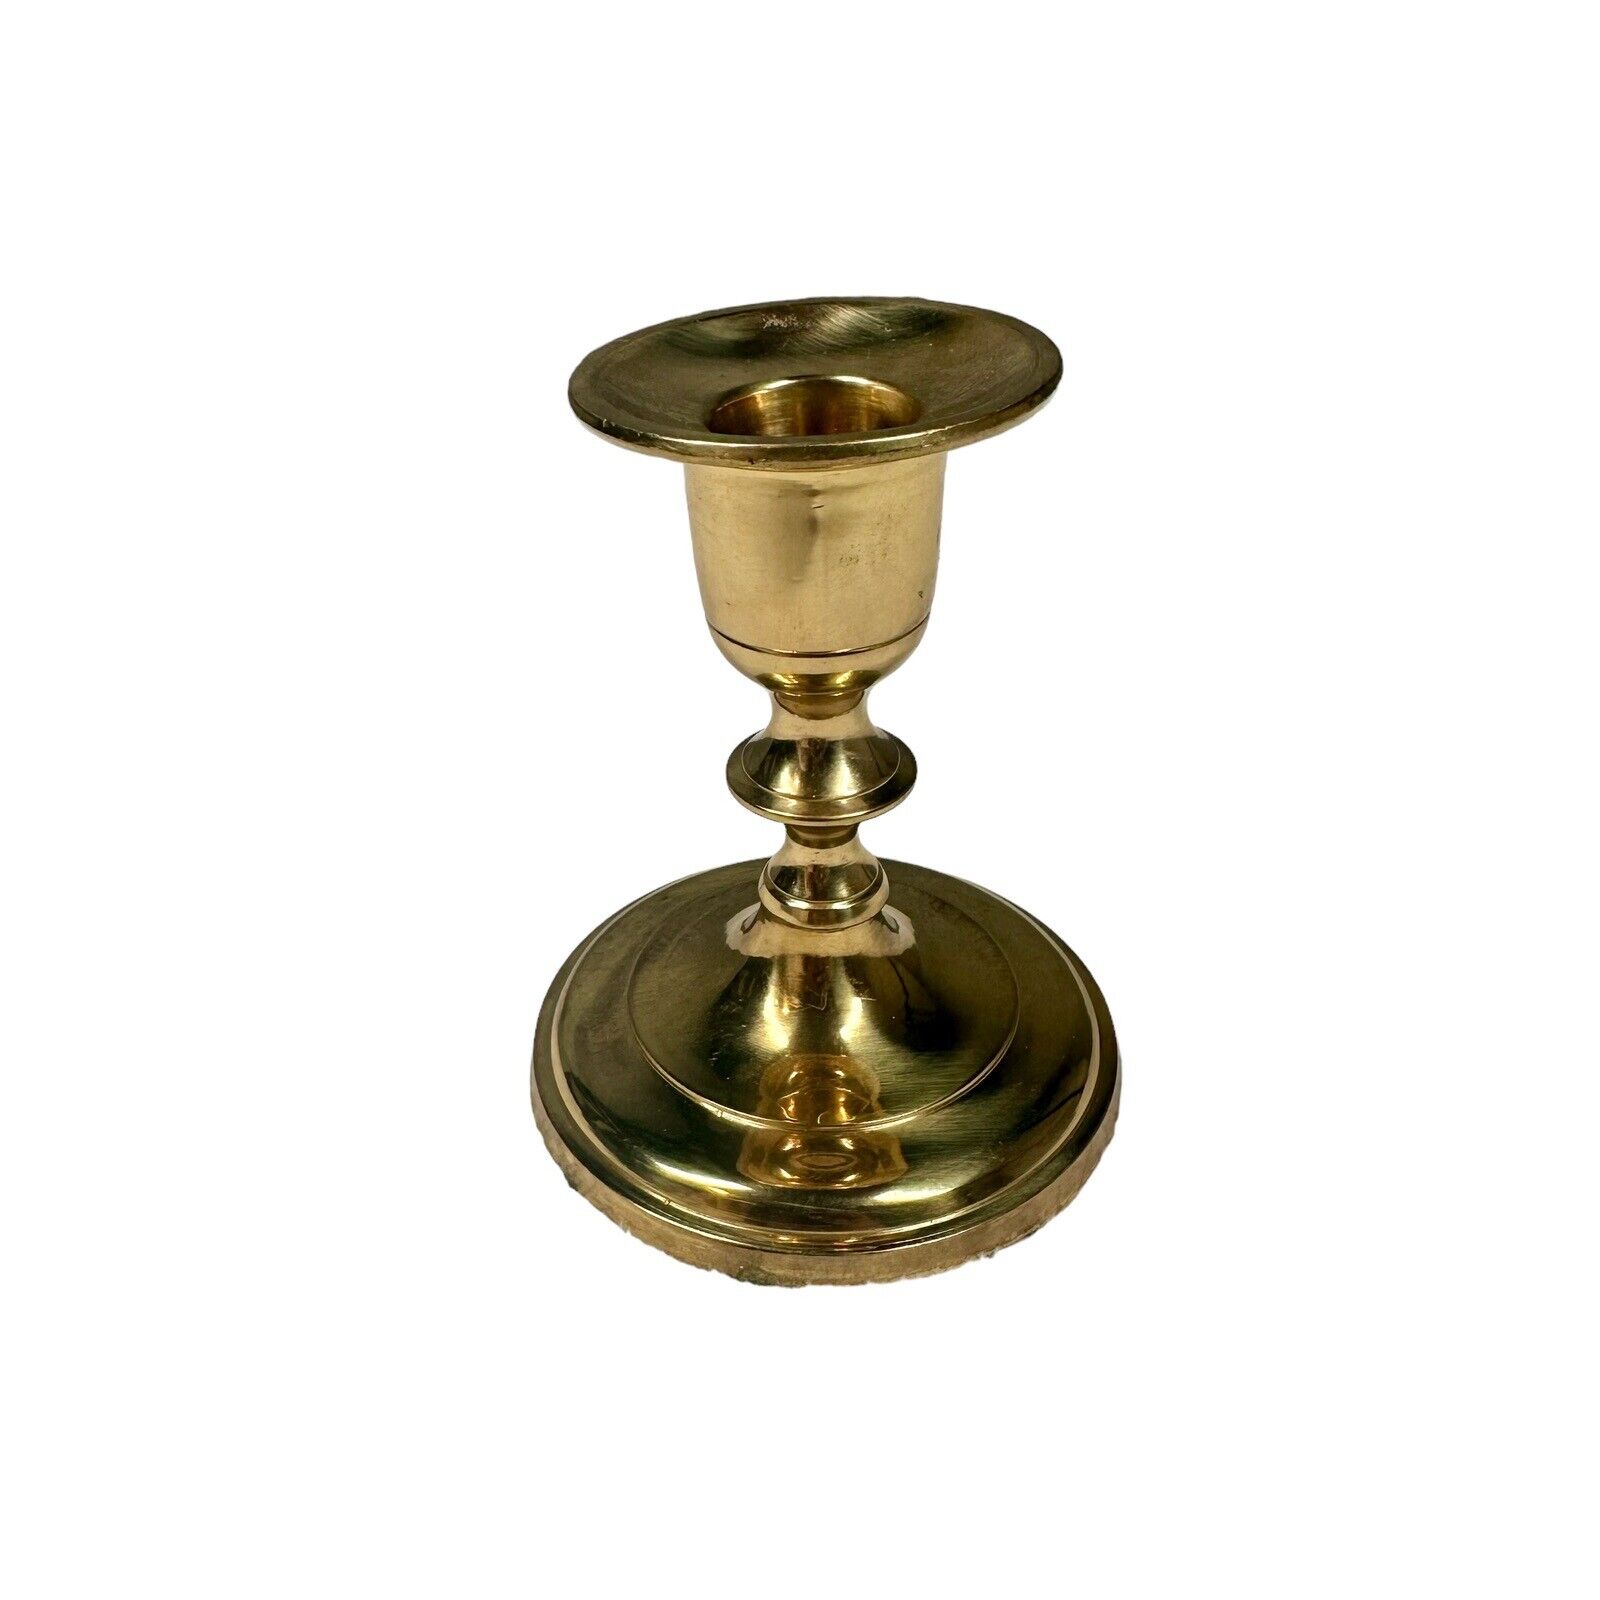 Vintage  Solid Brass Candlestick Holder 4 inch granny core MCM - Gold tone